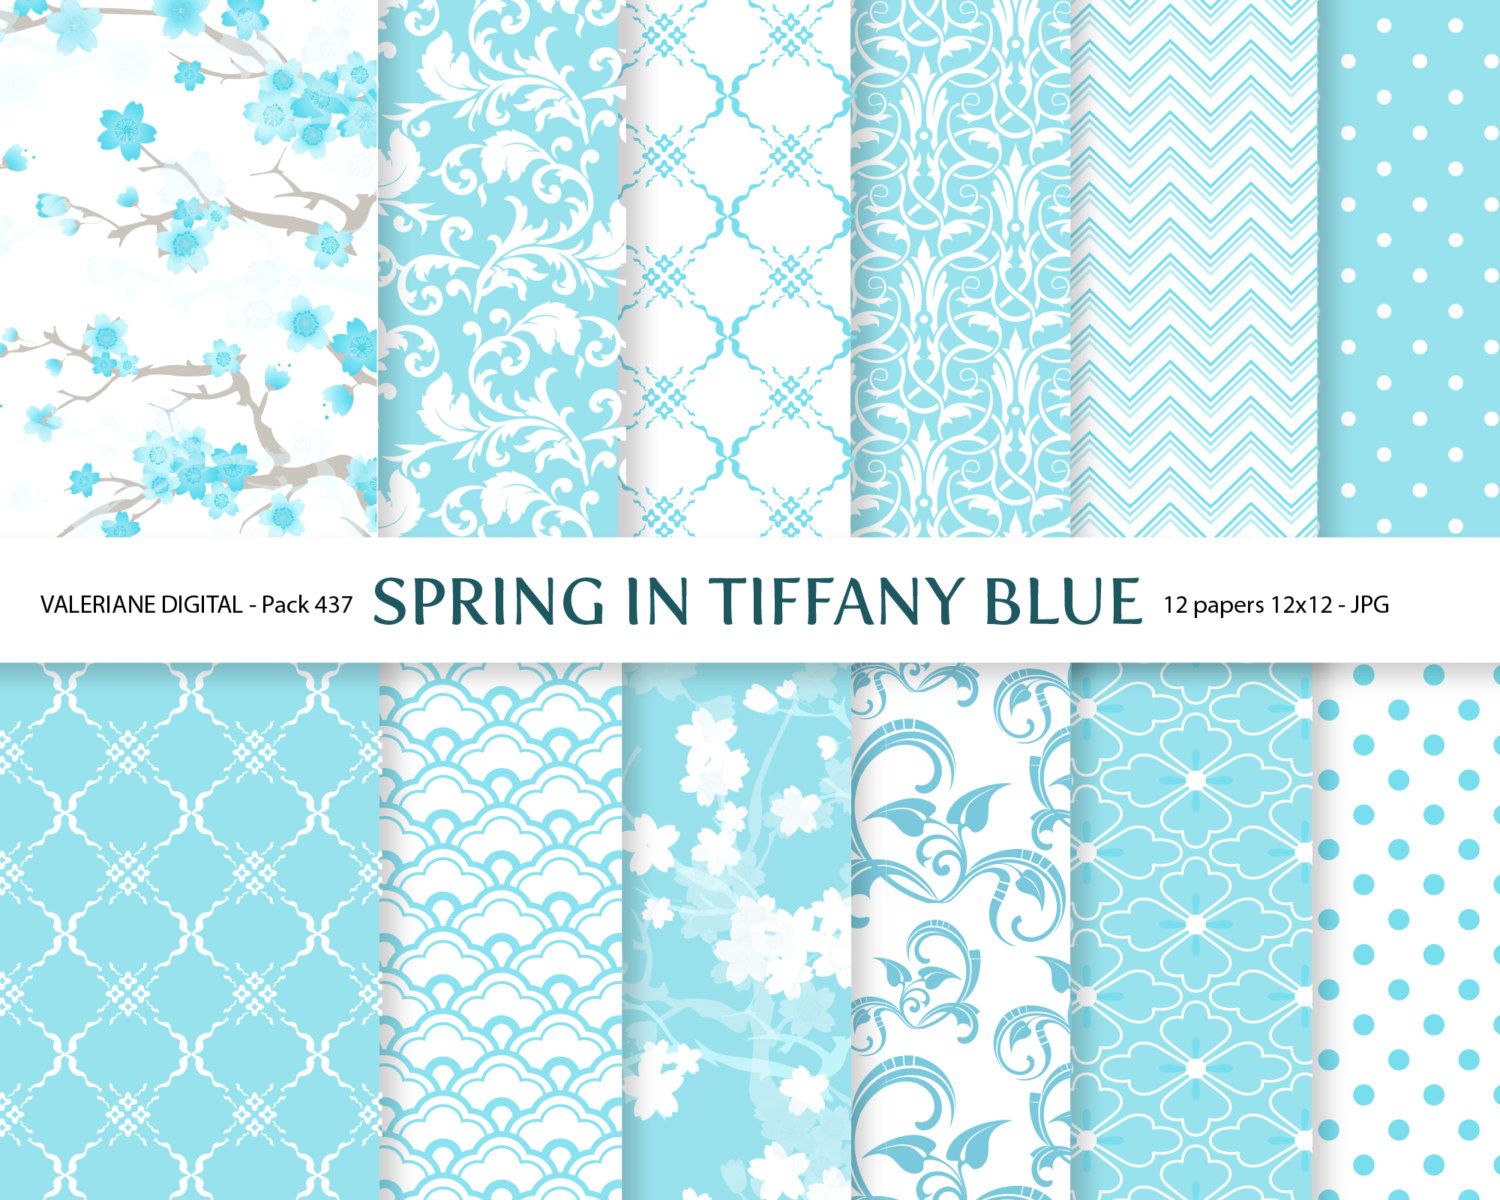 Digital Download Discoveries for TIFFANY BLUE from EasyPeach.com